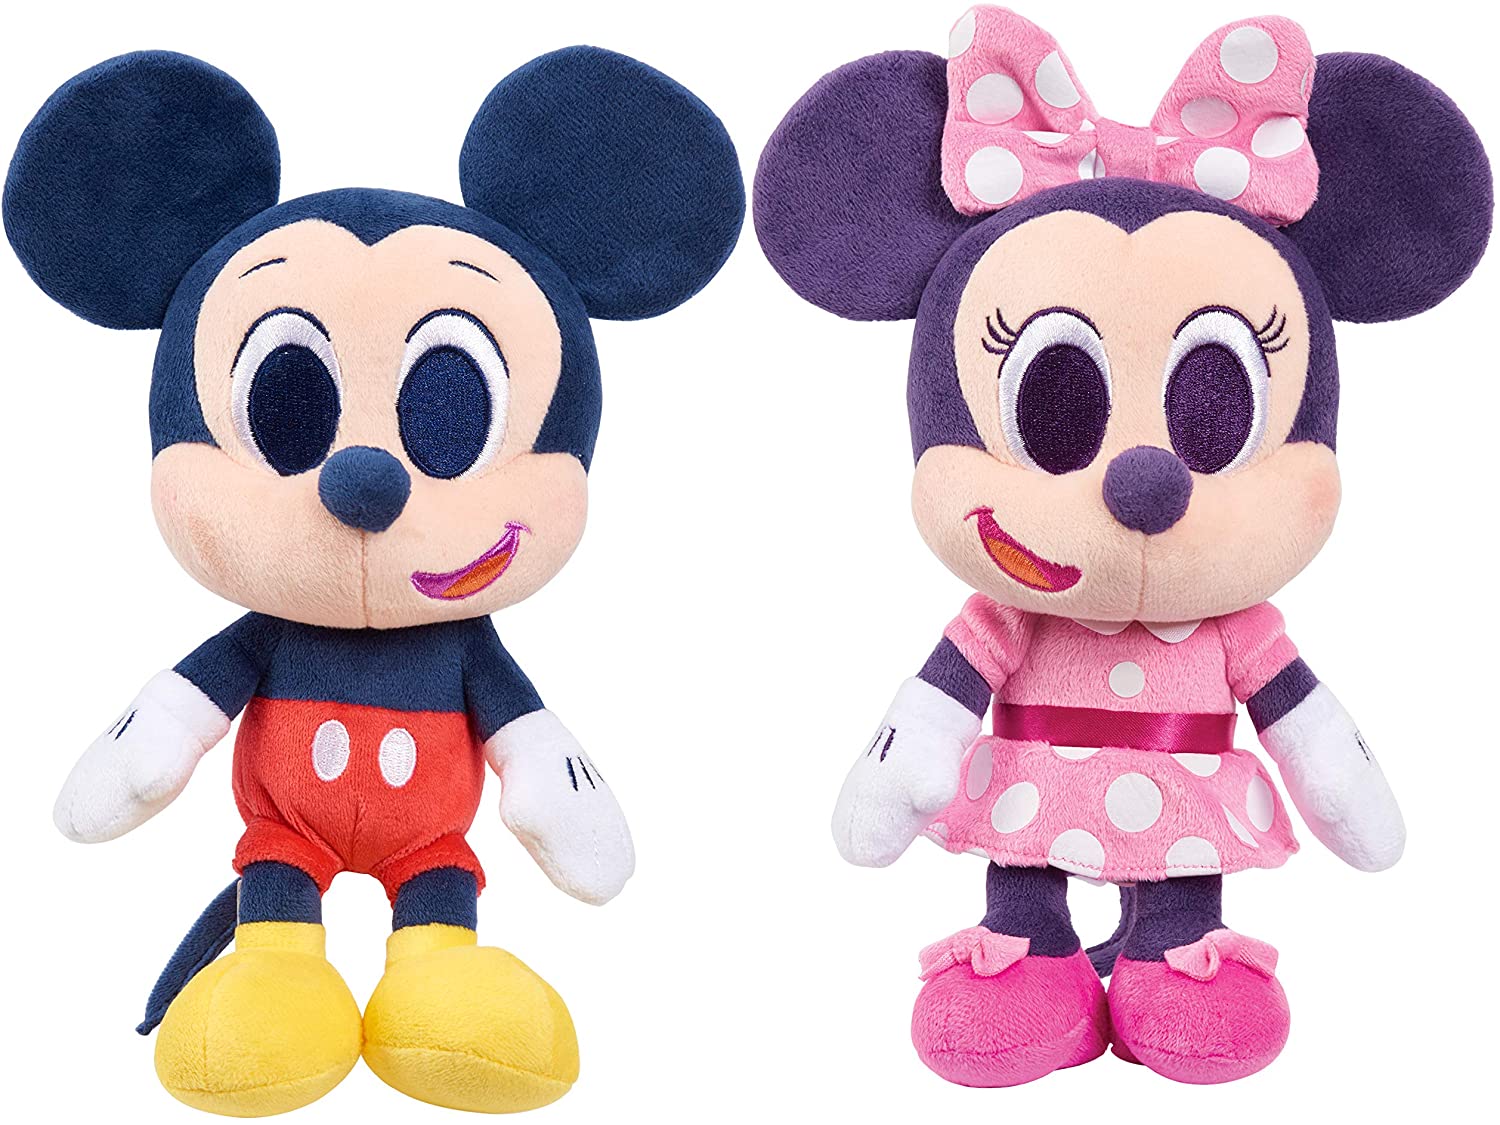 2-Pc Disney Junior Music Lullabies 9" Mickey Mouse & Minnie Mouse Plush Set w/ Sounds $10 + Free Shipping w/ Amazon Prime or Orders $25+